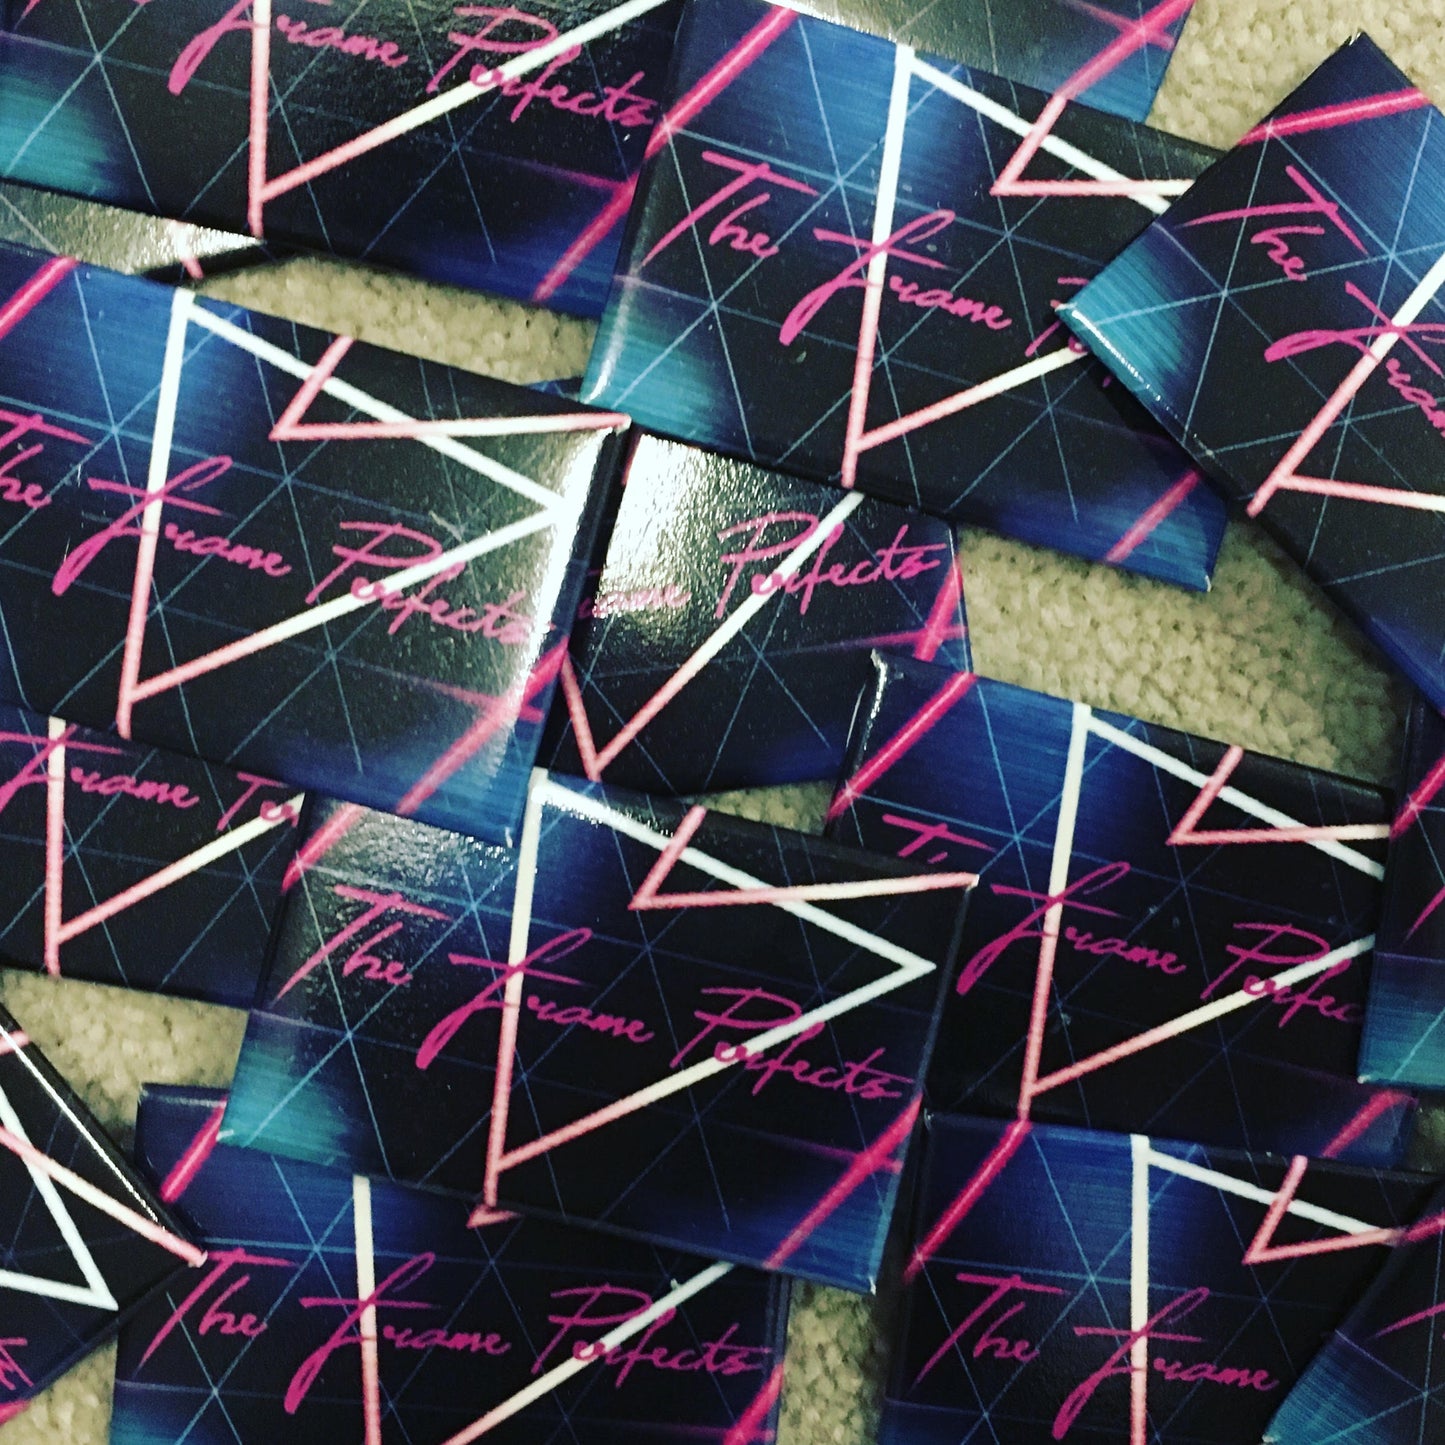 the frame perfects promotional button celebrating first synthwave live show